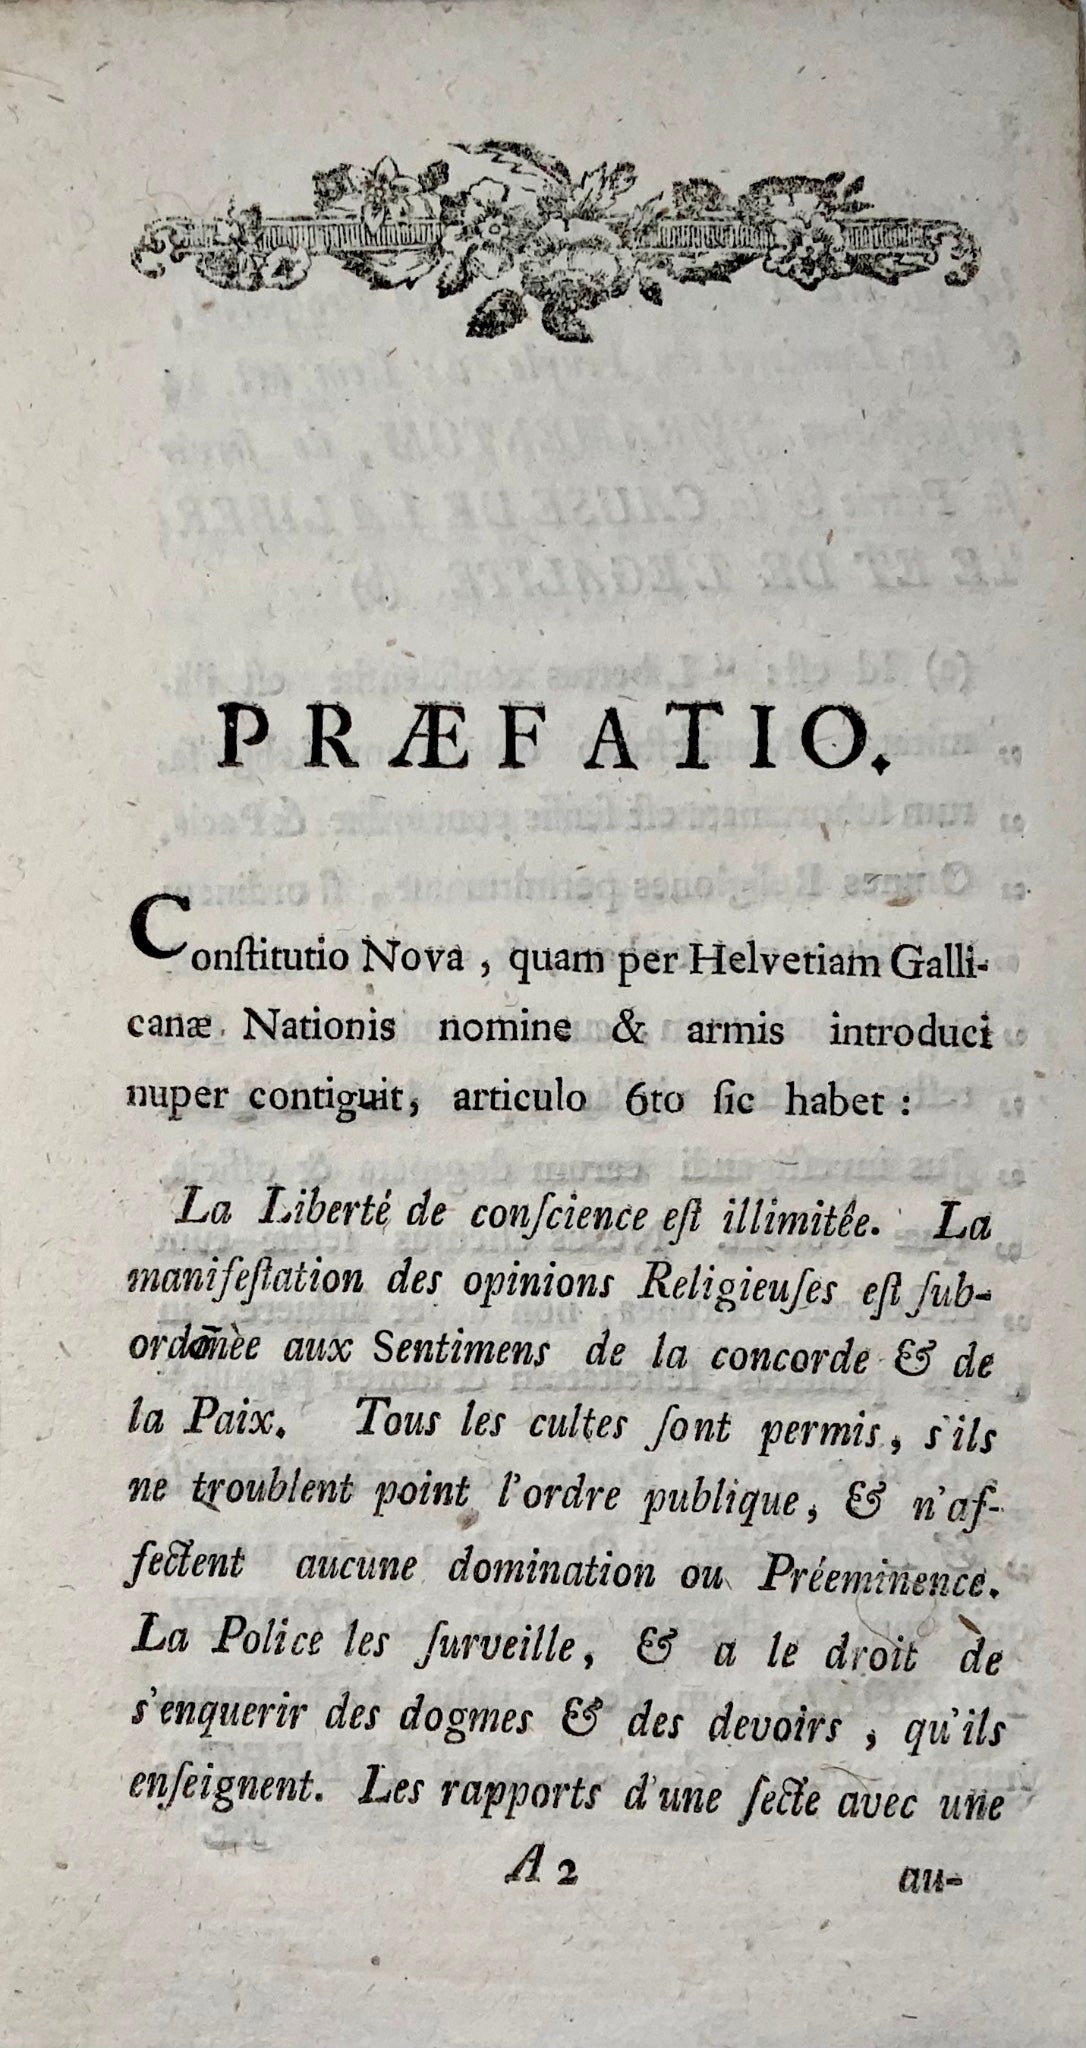 1798 Reflections on Constitutiion of Switzerland, Helvetic Republic, pamphlet